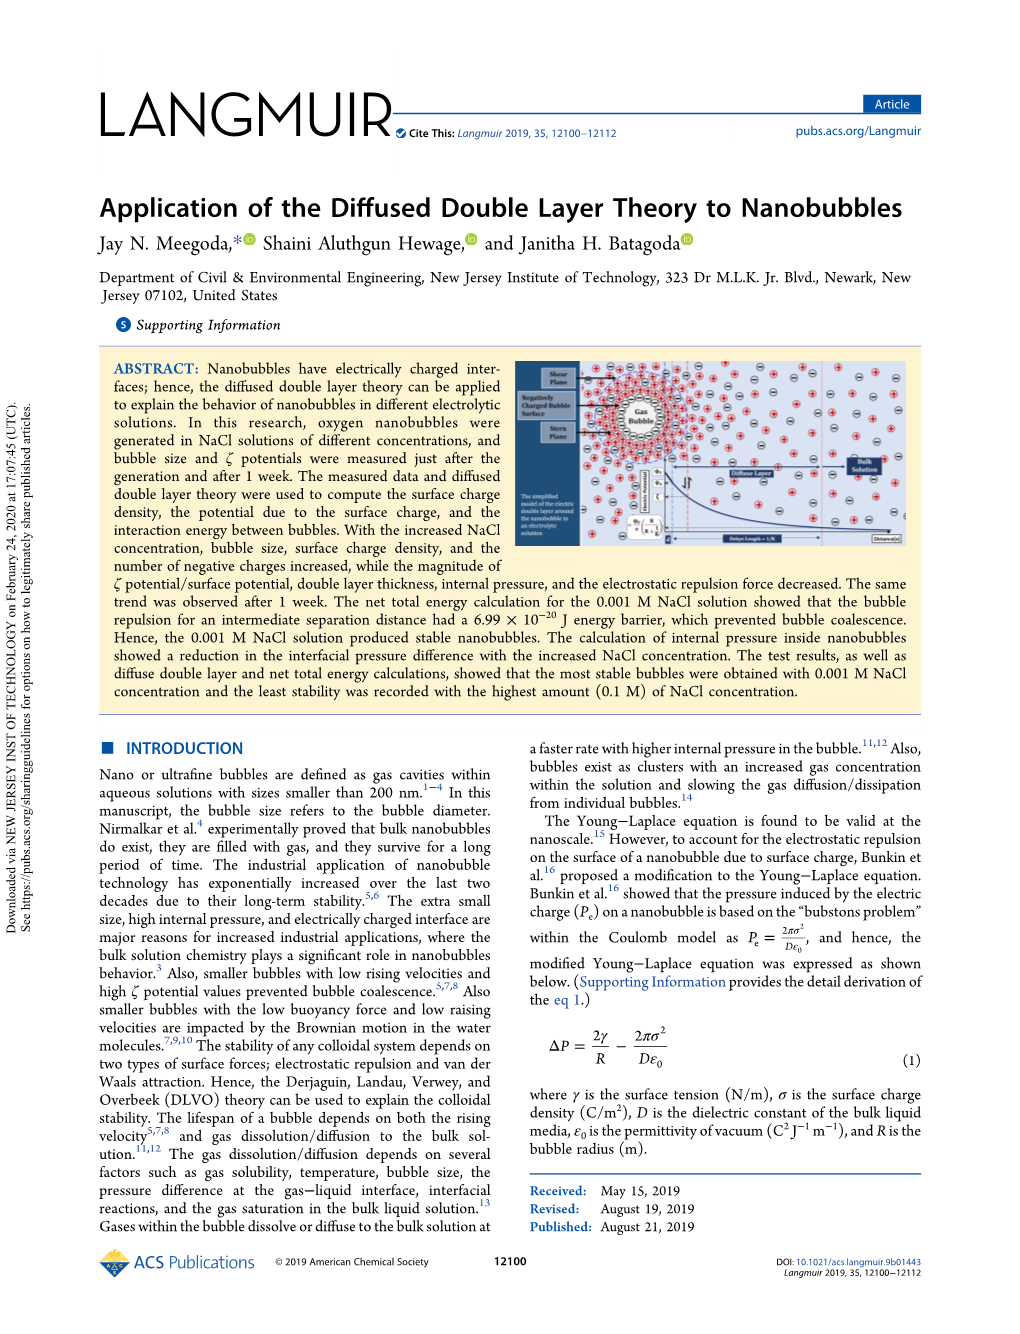 Application of the Diffused Double Layer Theory to Nanobubbles